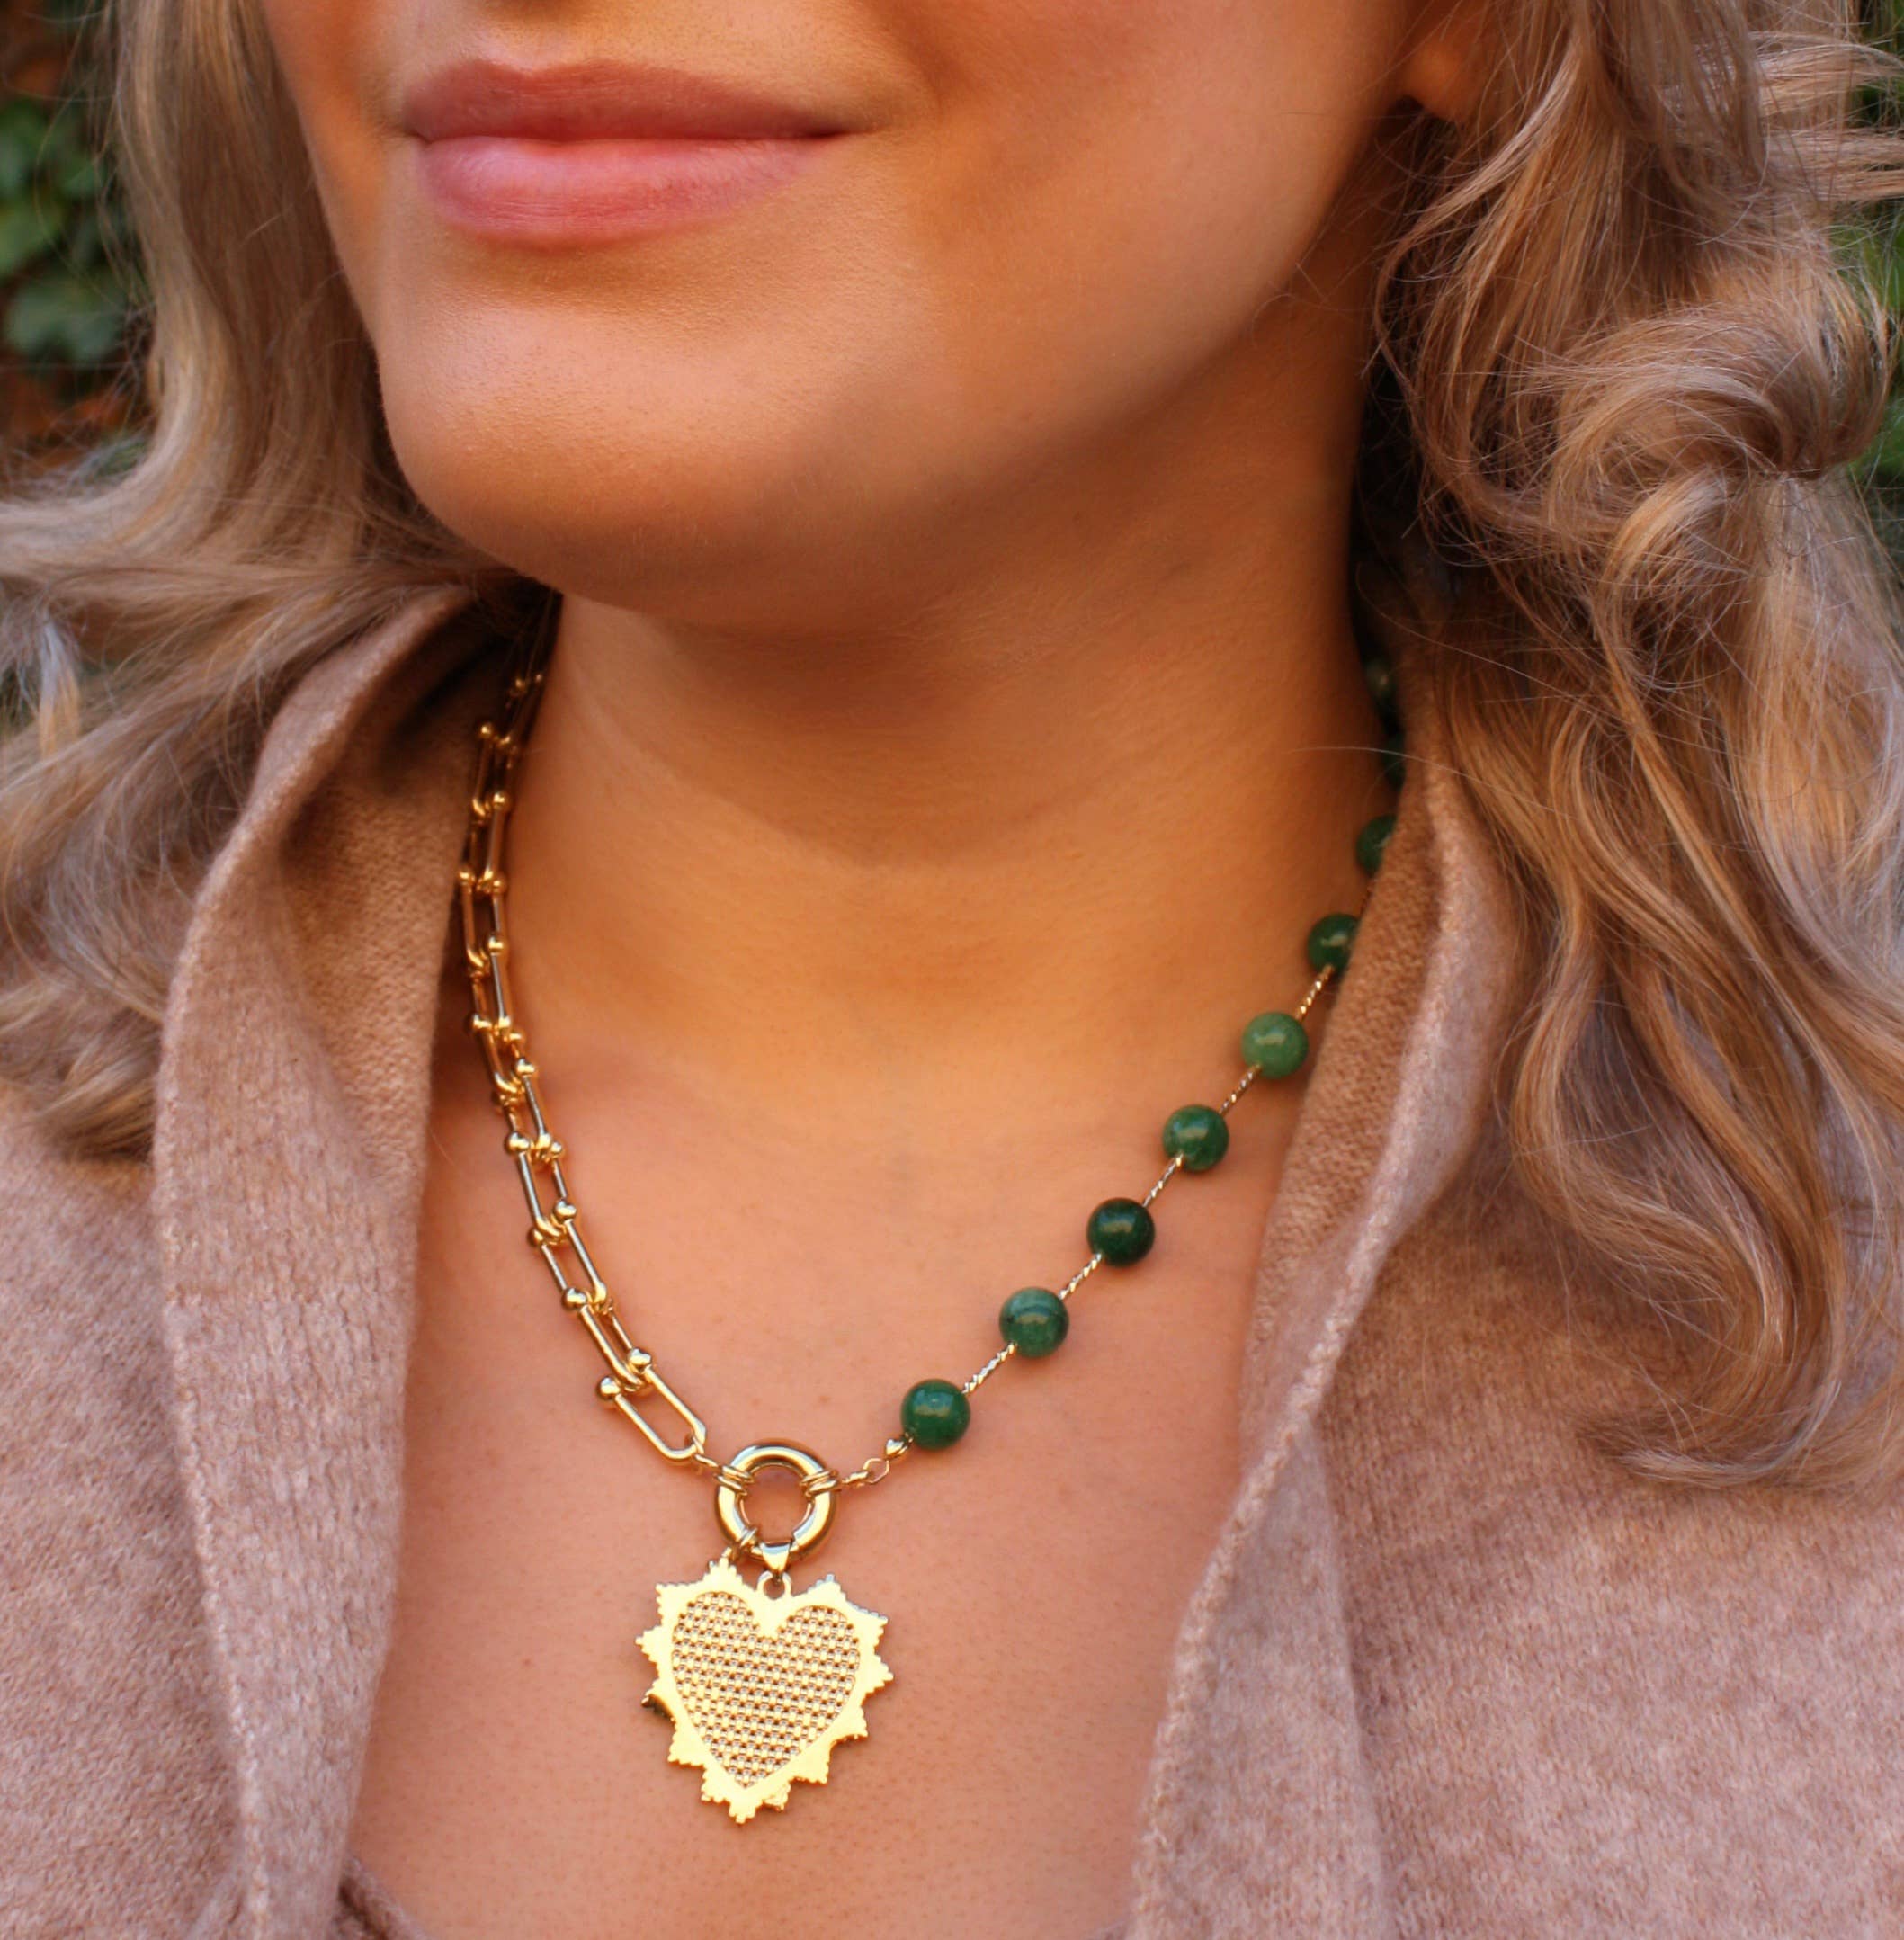 Intricate Heart Charm Necklace